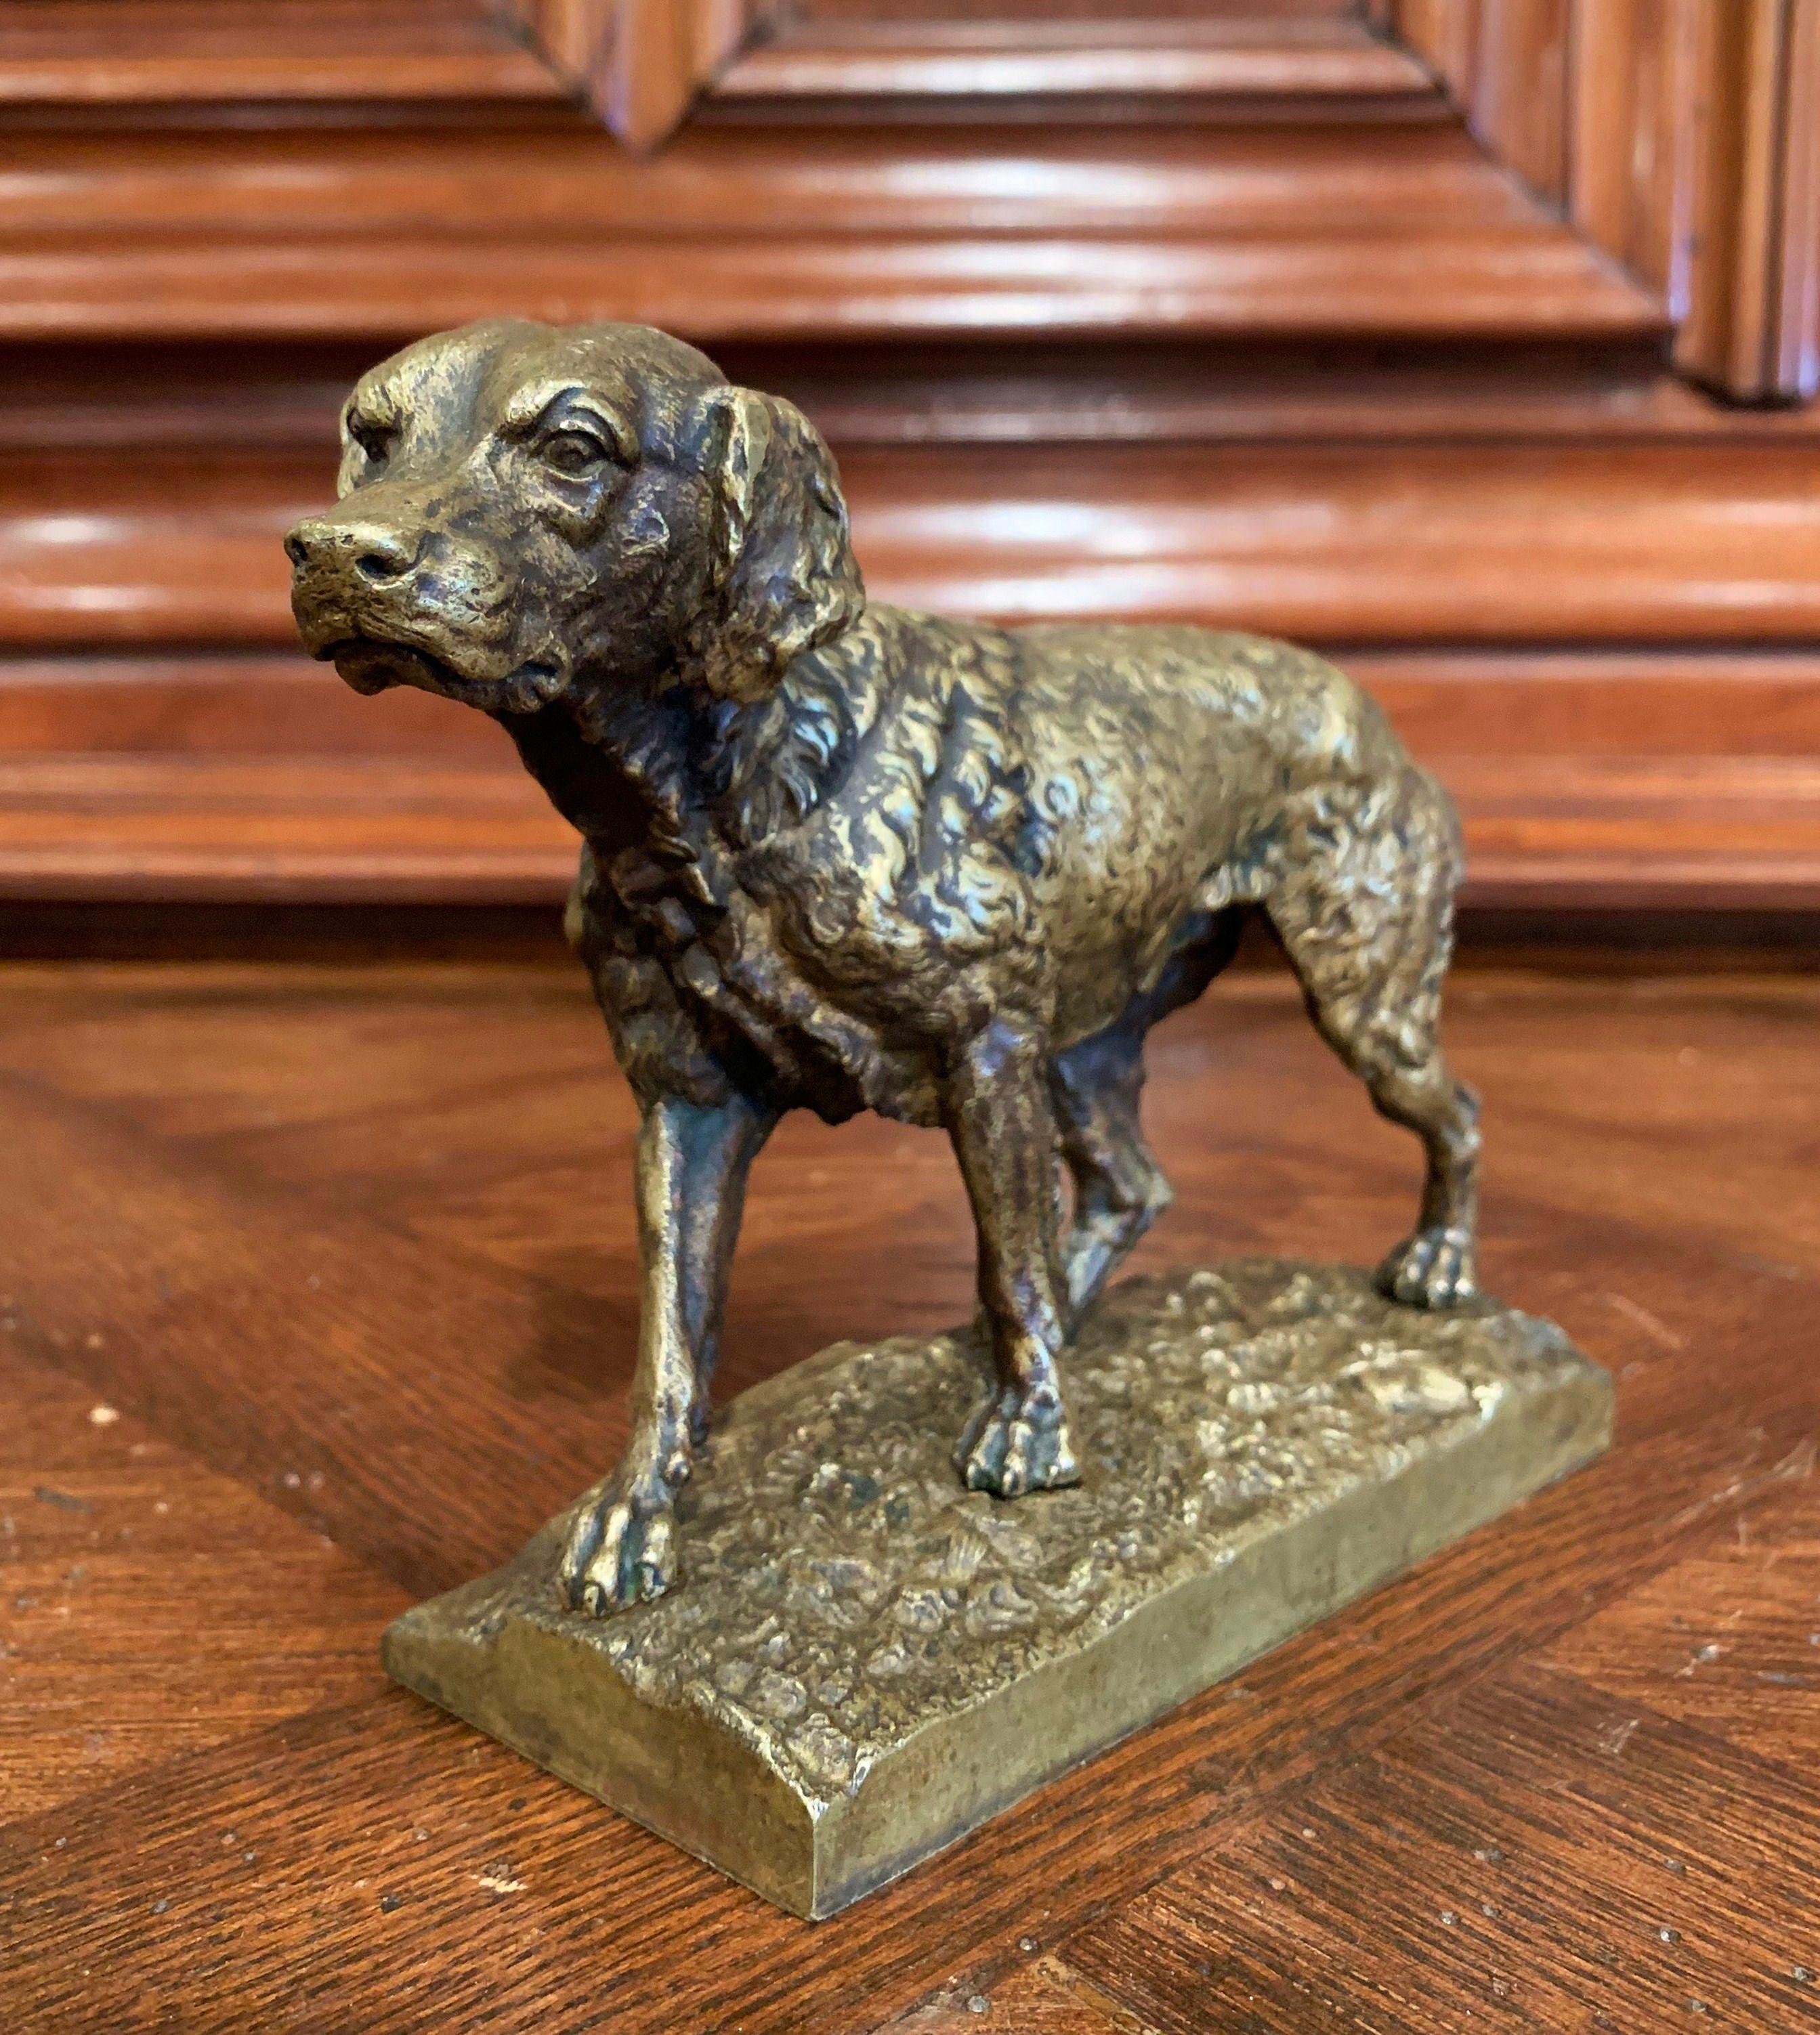 This antique bronze sculpture was created in France, circa 1870, in the manner of French sculptor Jules Moiniez. The composition features a setter standing on rocky ground with leaf and branch decor and looking ahead. The elegant piece is in